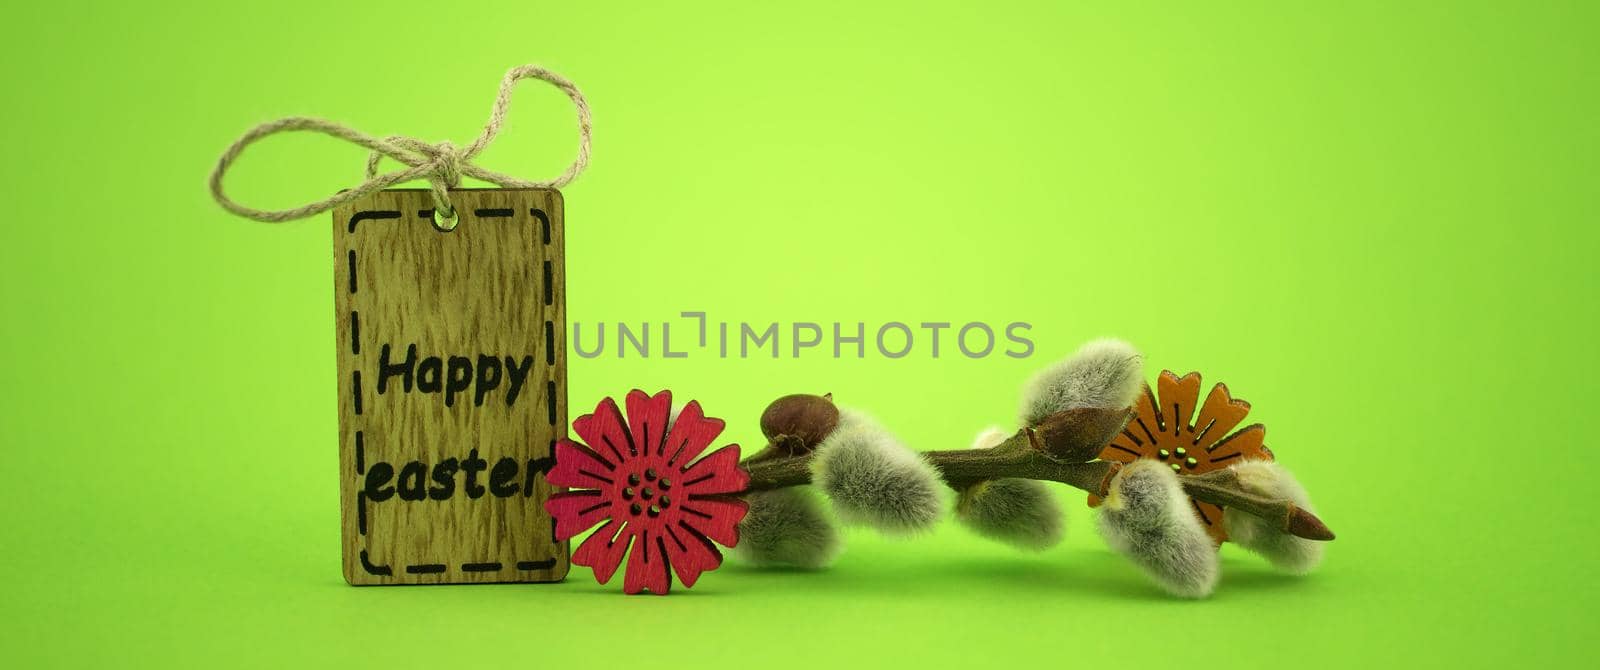 Easter banner and wooden label with text by NetPix